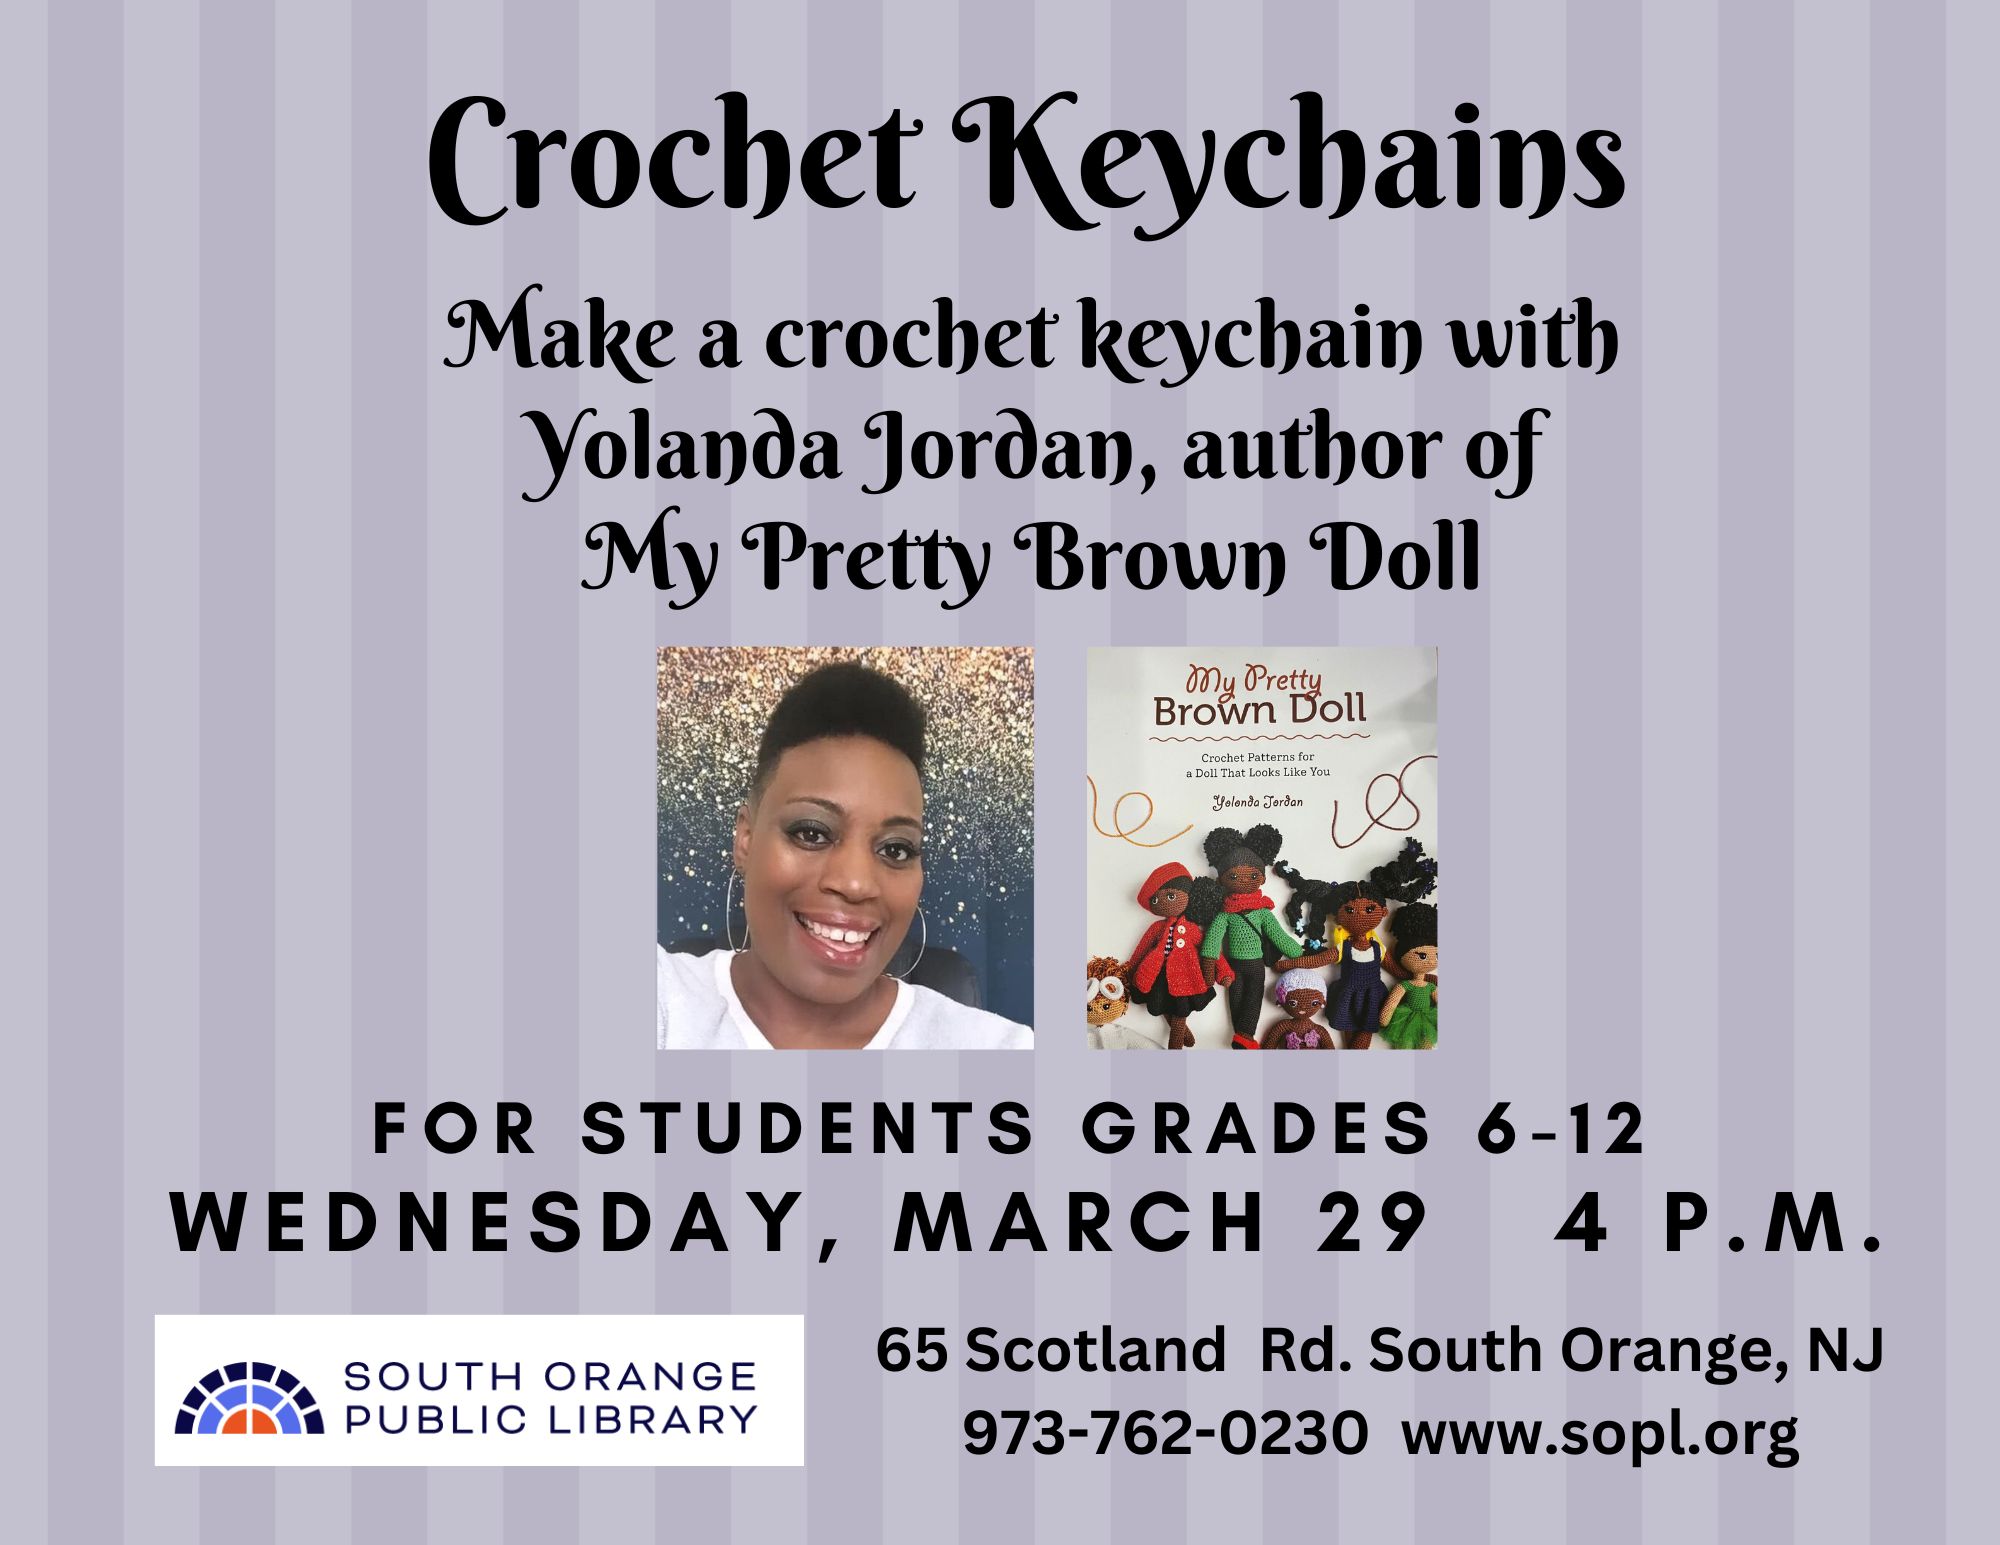 Learn to Crochet - Maplewood Road